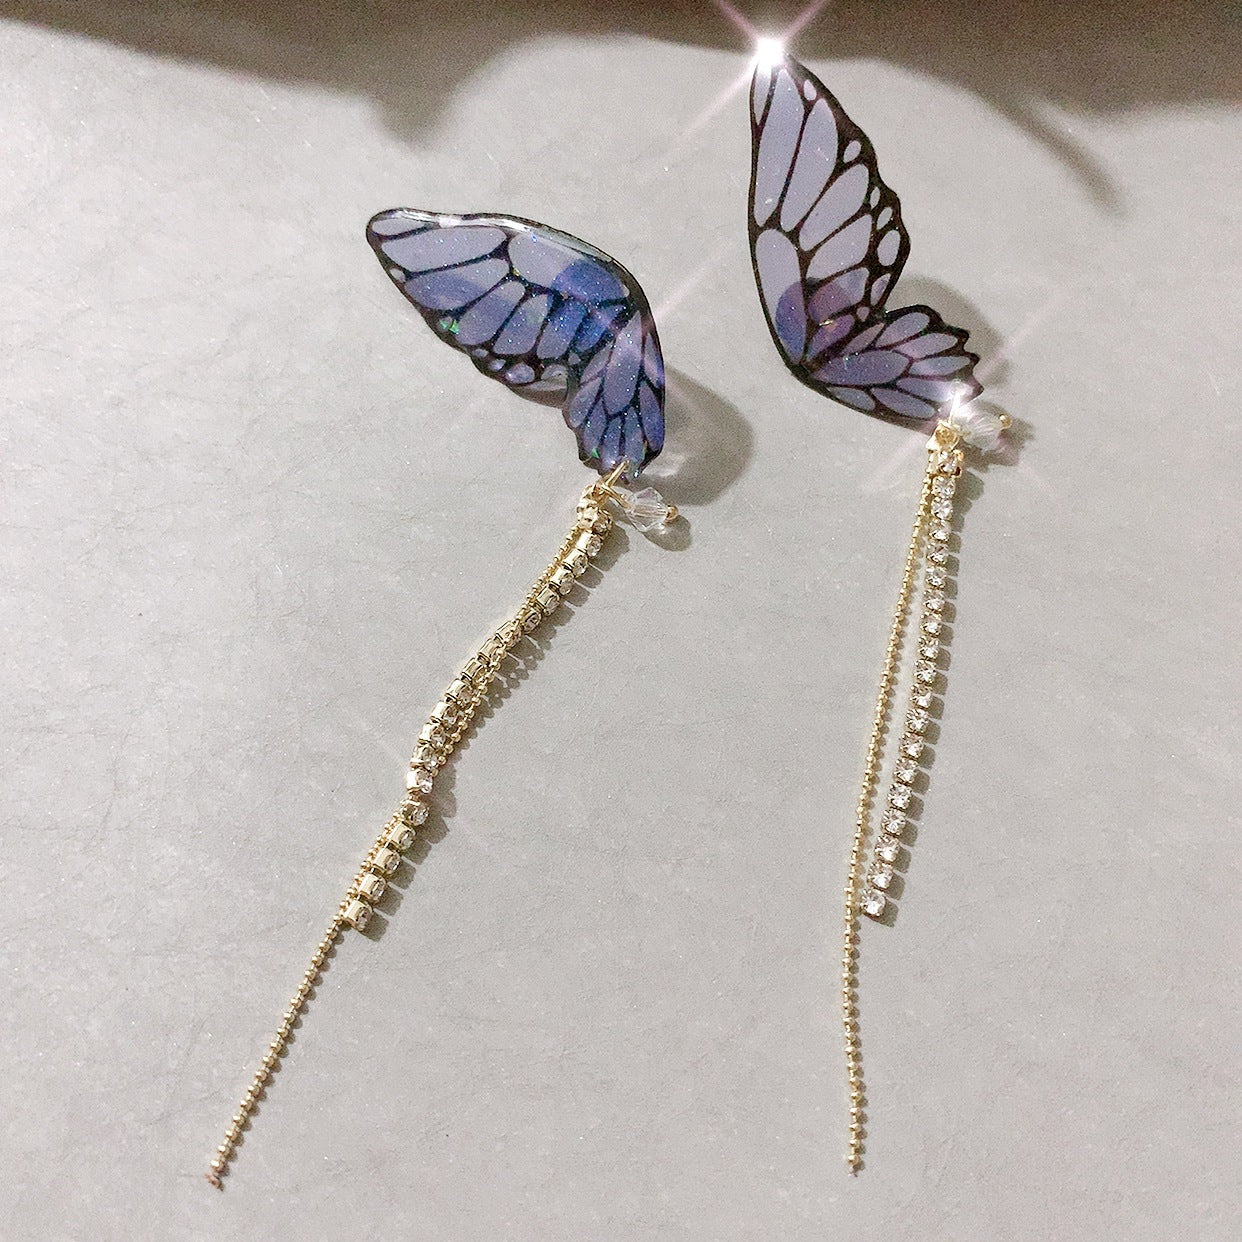 Women's Earrings With Three Dimensional Butterfly Pattern Full Of Diamonds And Tassels